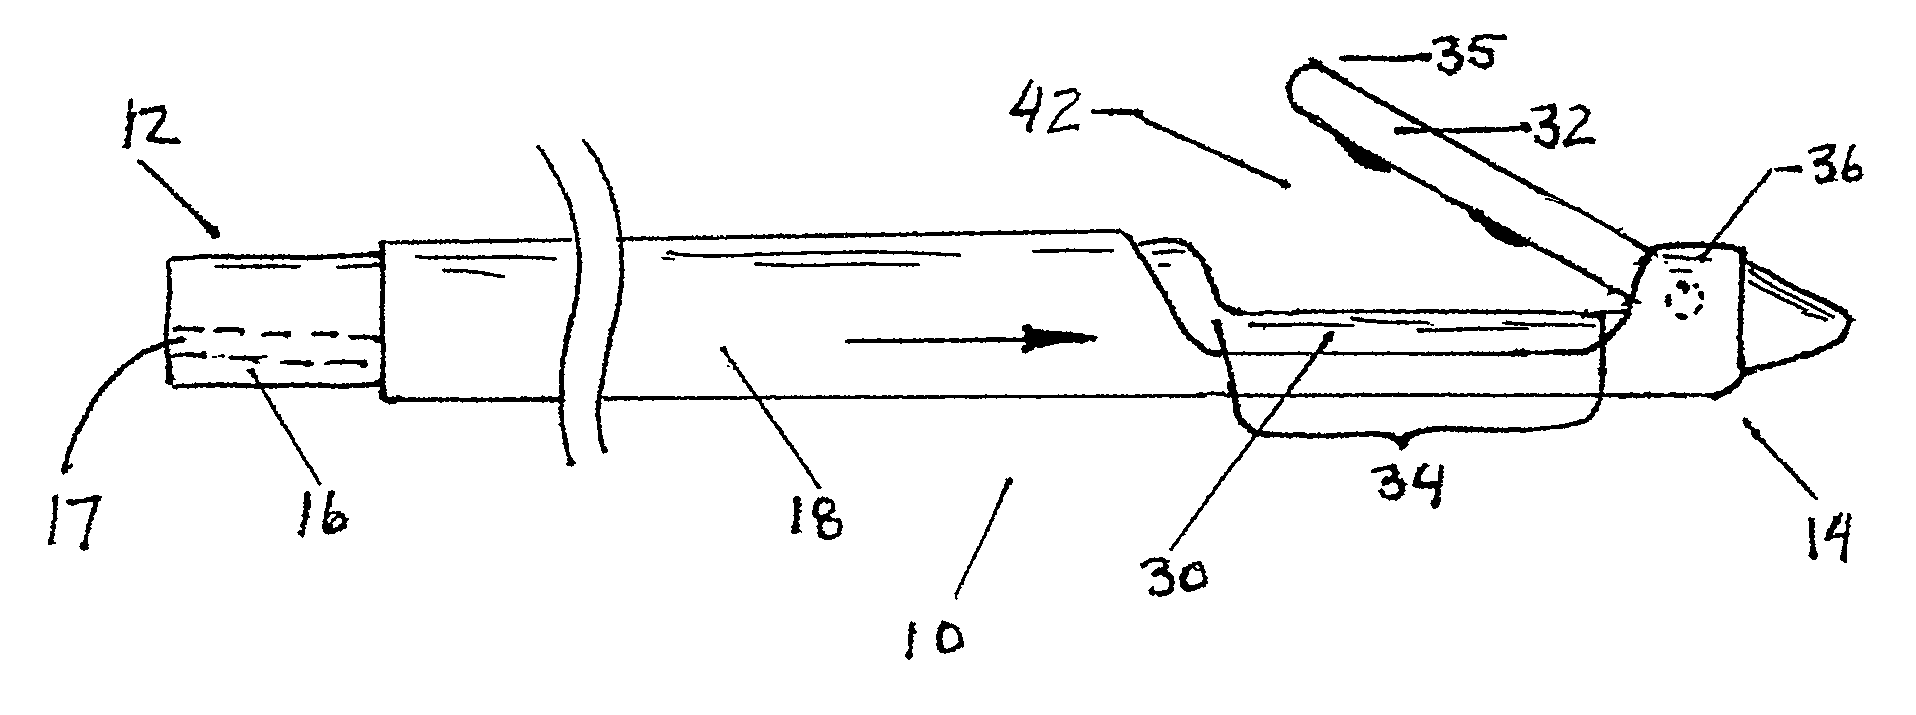 Reverse sealing and dissection instrument